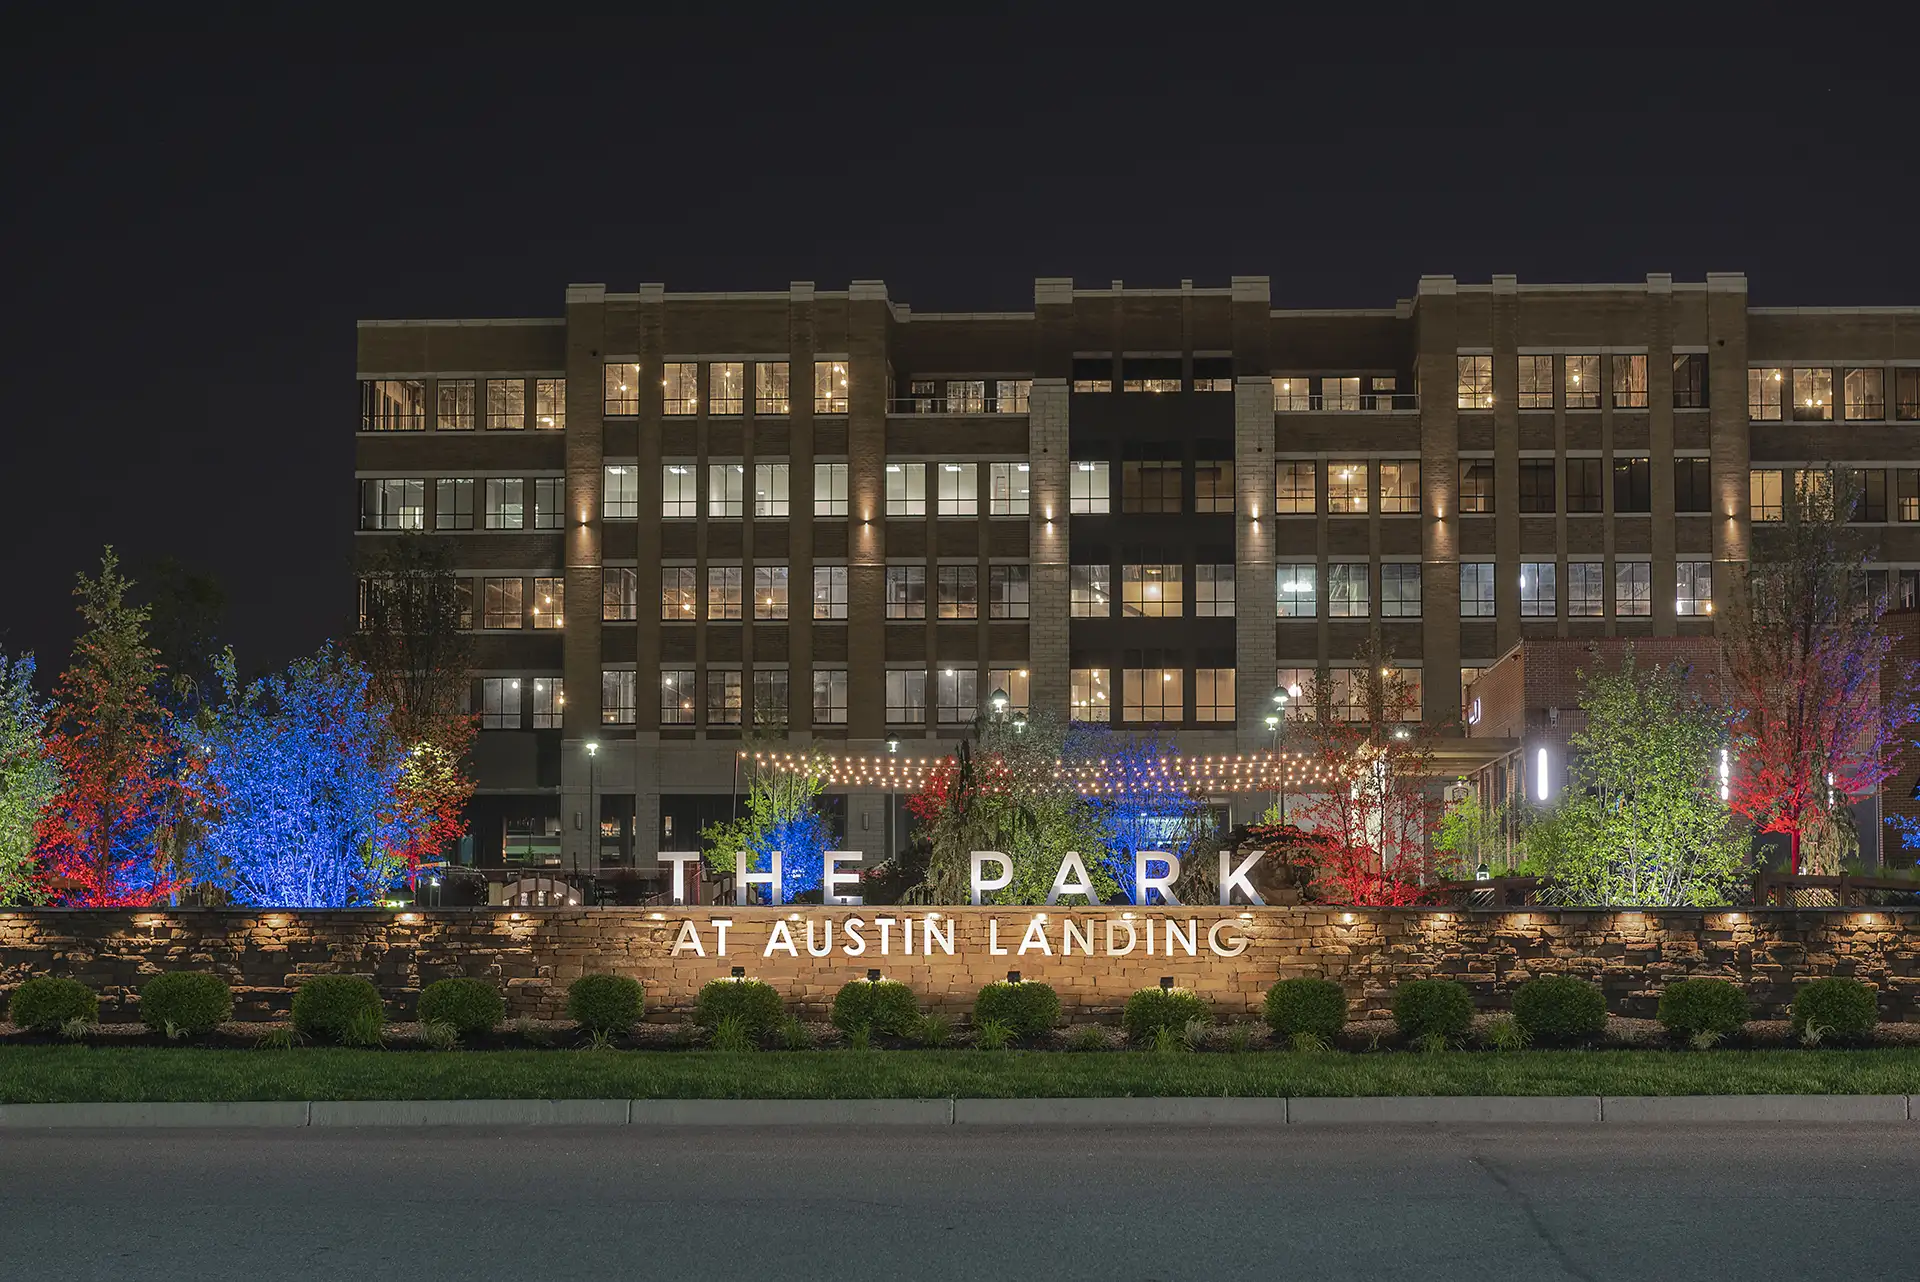 The Park at Austin Landing image 3 commercial outdoor lighting Lighthouse Design Studio Miamisburg OH